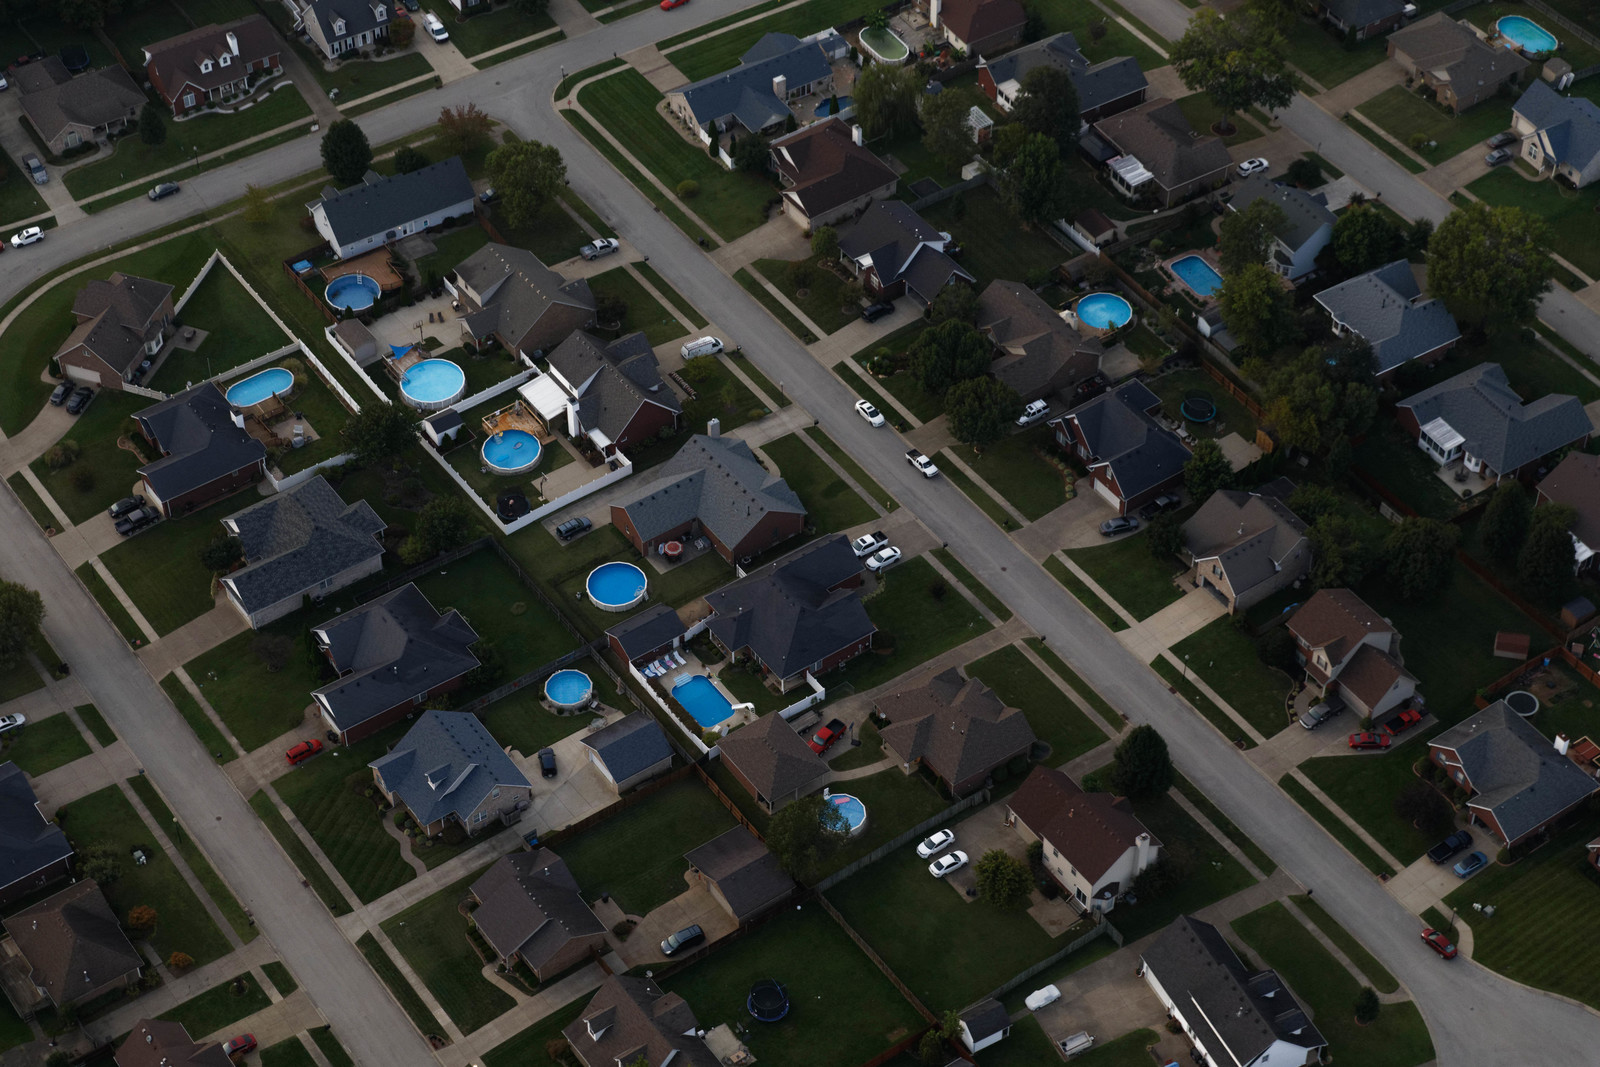 aerial image of housing development showing backyards and a few swimming pools. 